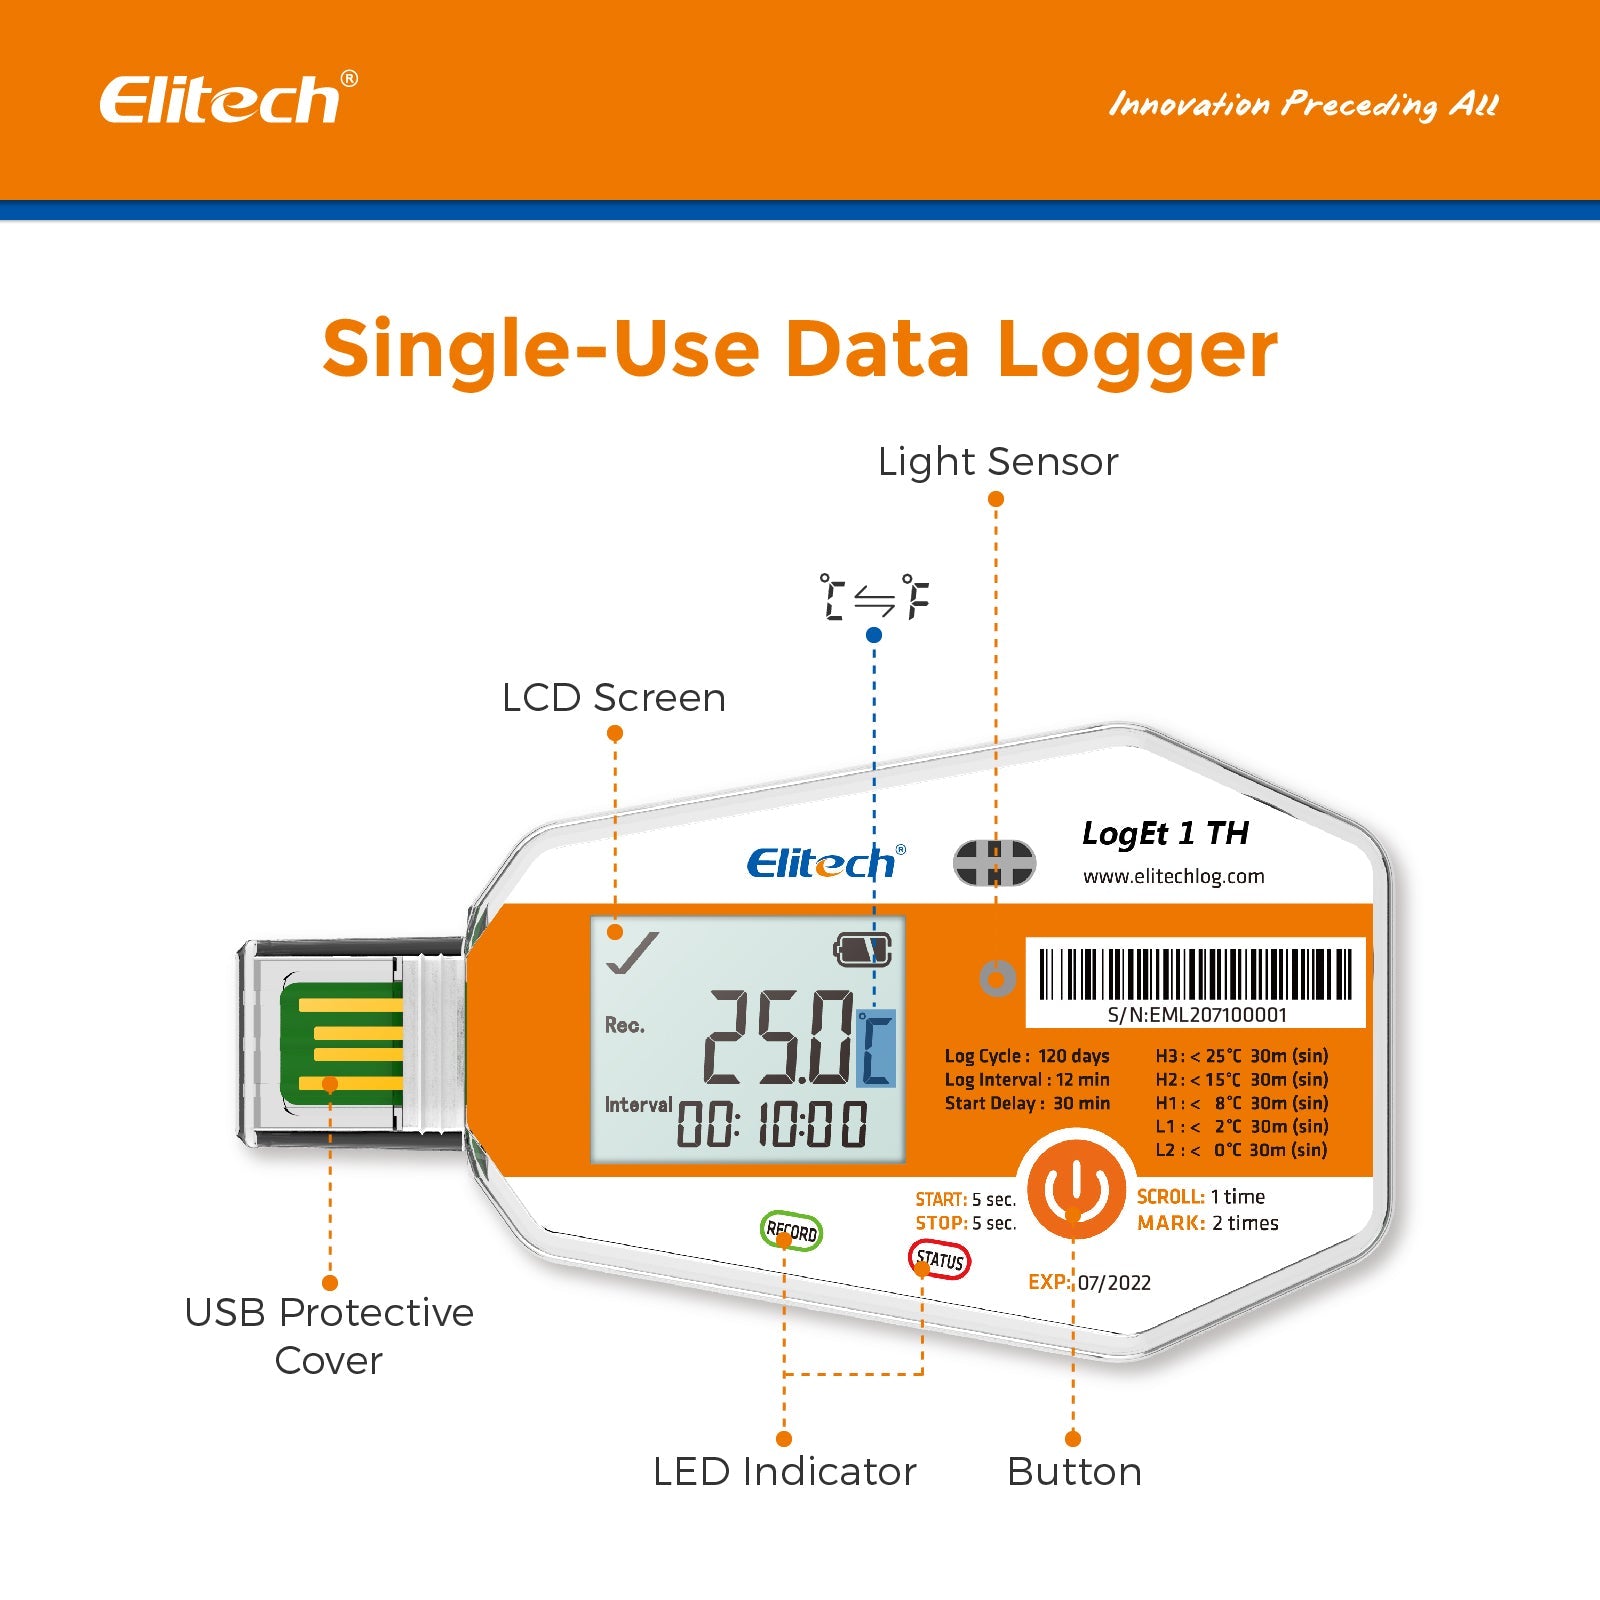 Elitech LogEt 1 TH Single Use Temperature and Humidity Data Logger - Elitech Technology, Inc.